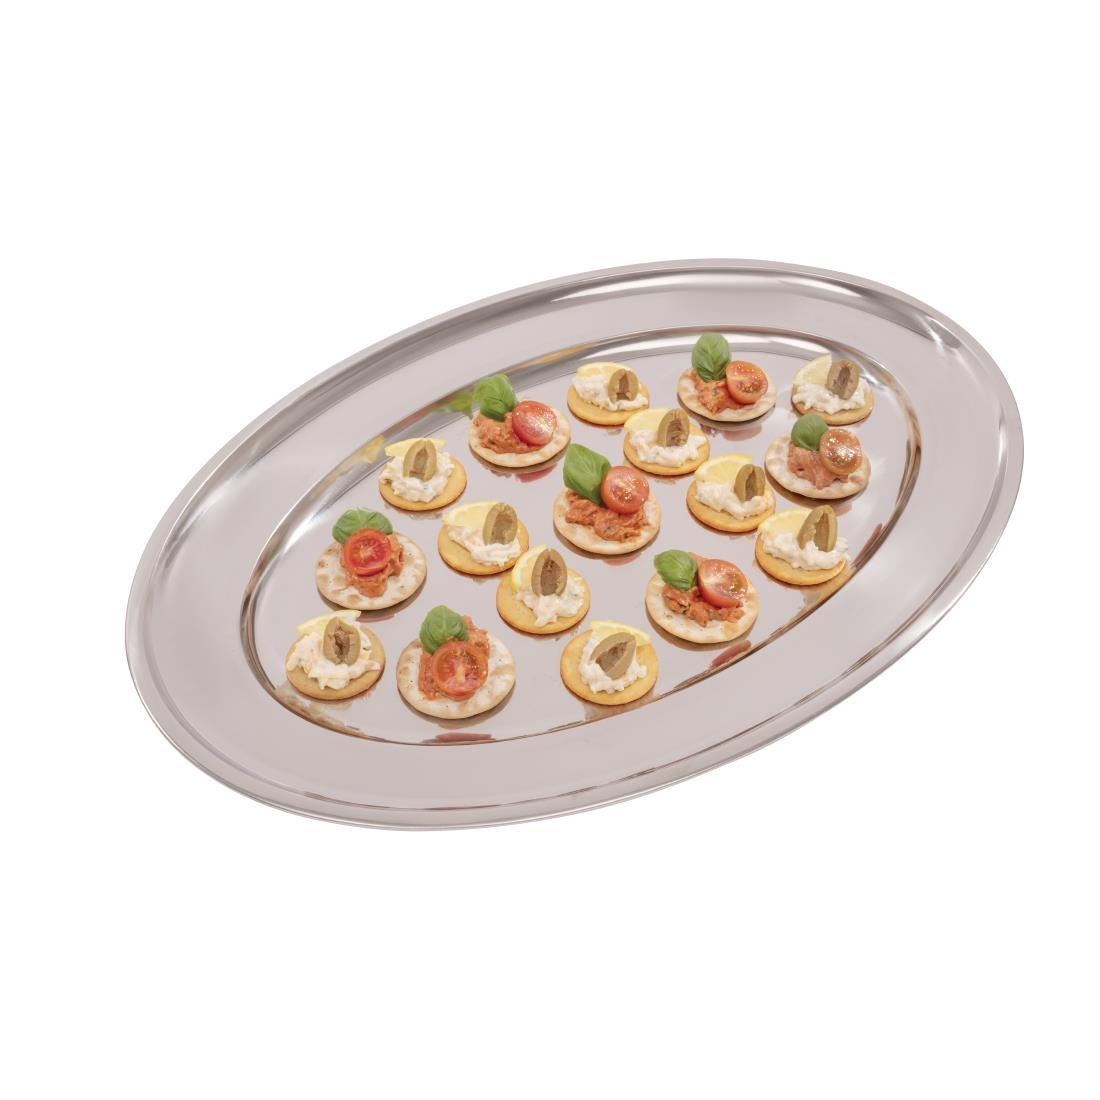 Olympia Stainless Steel Oval Serving Tray 605mm - K369  - 4